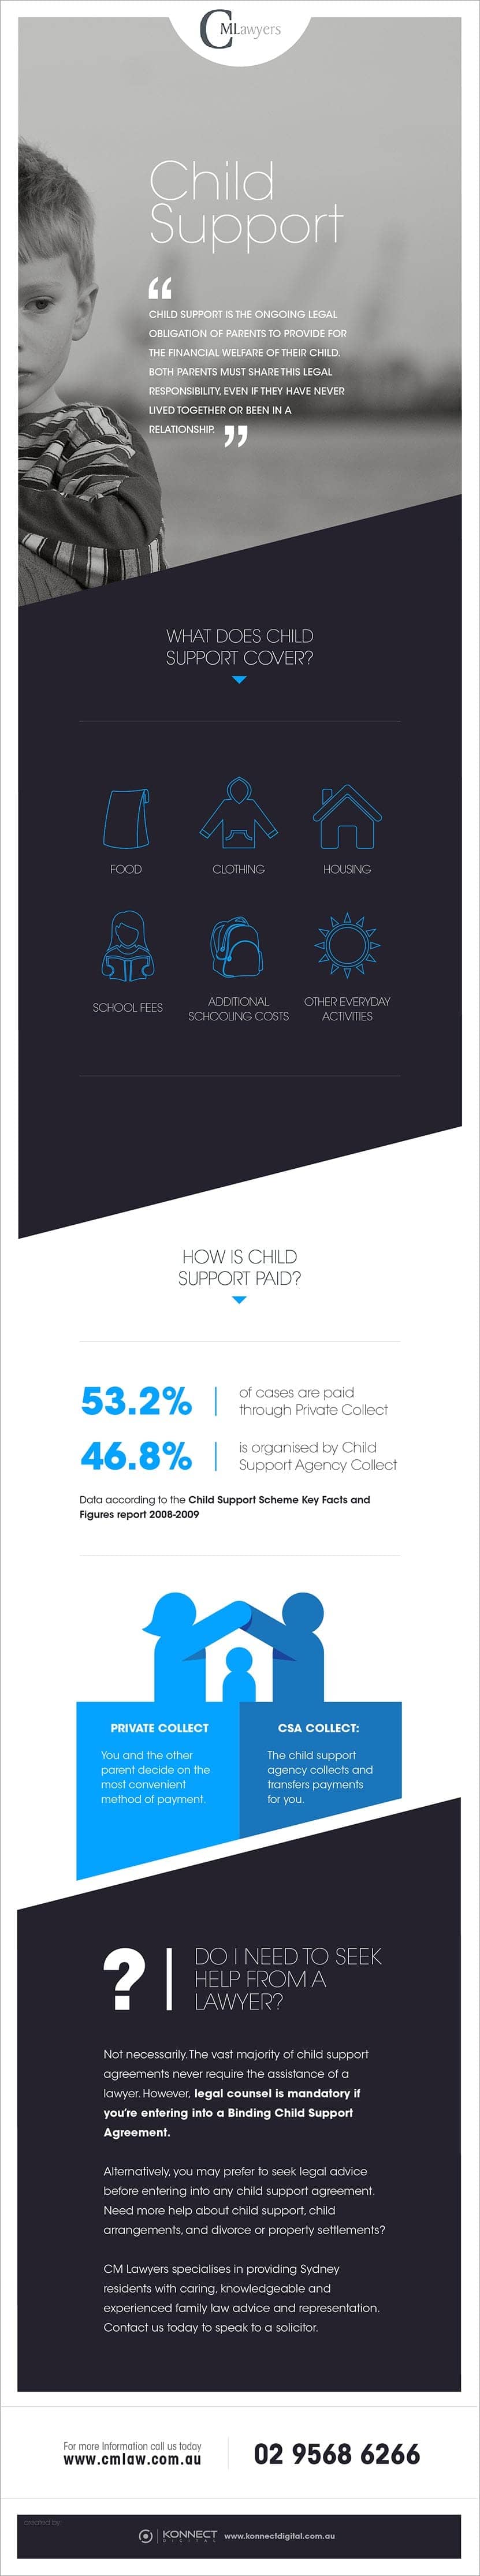 what_does_child_support_cover_infographic